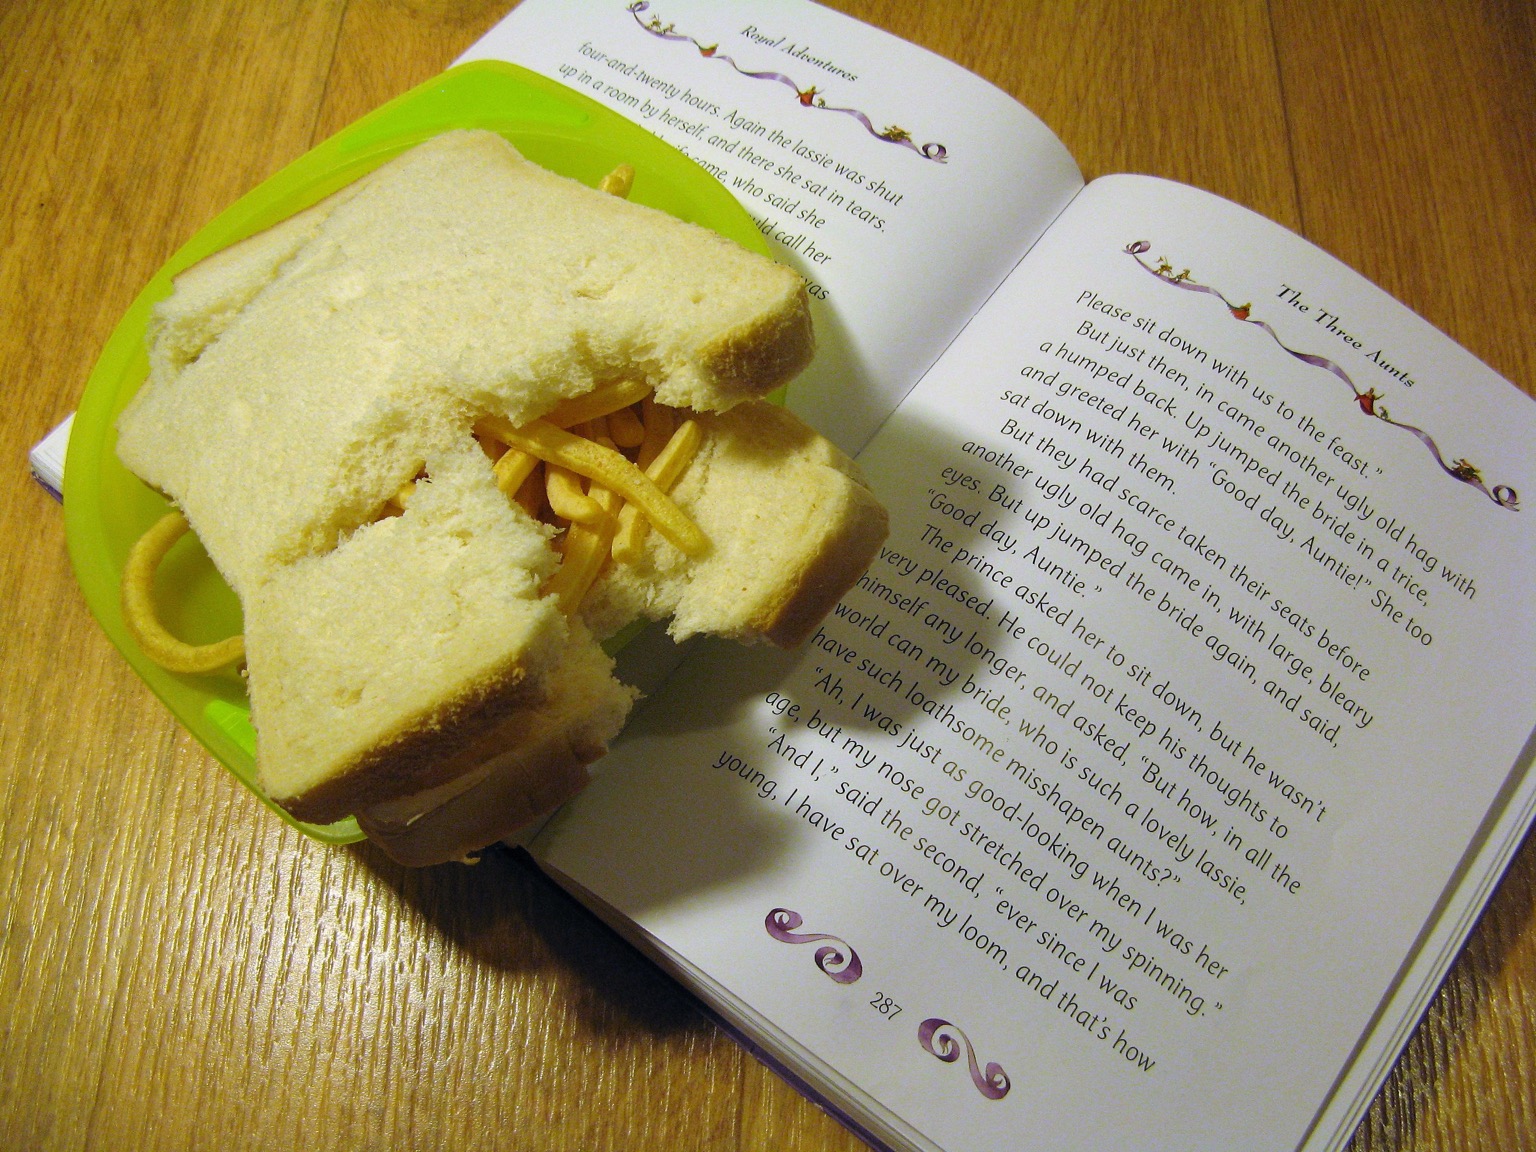 Torn/eaten French Fries sandwich on a book